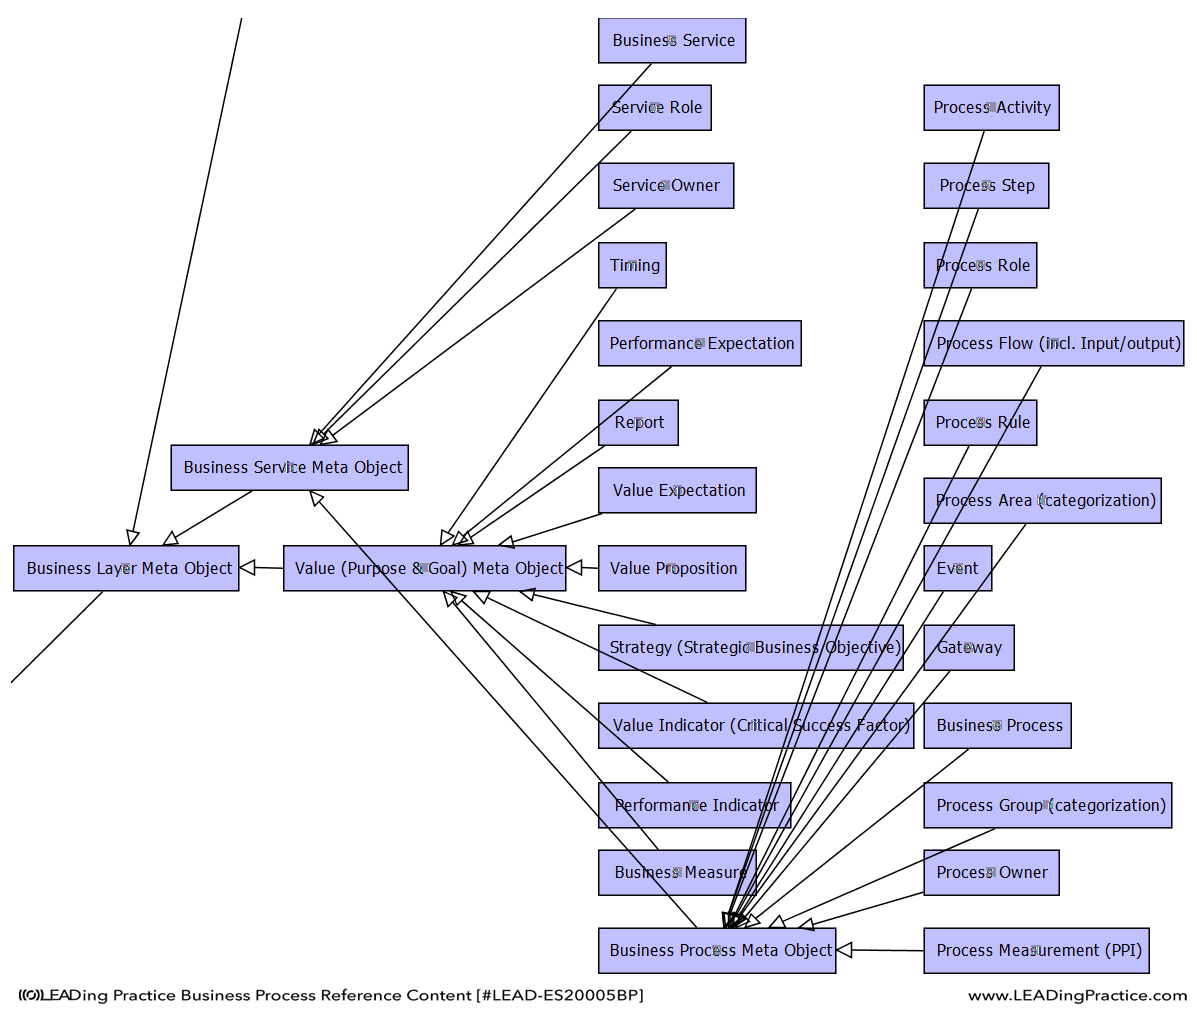 Extract from the Business Layer Meta Object Ontology